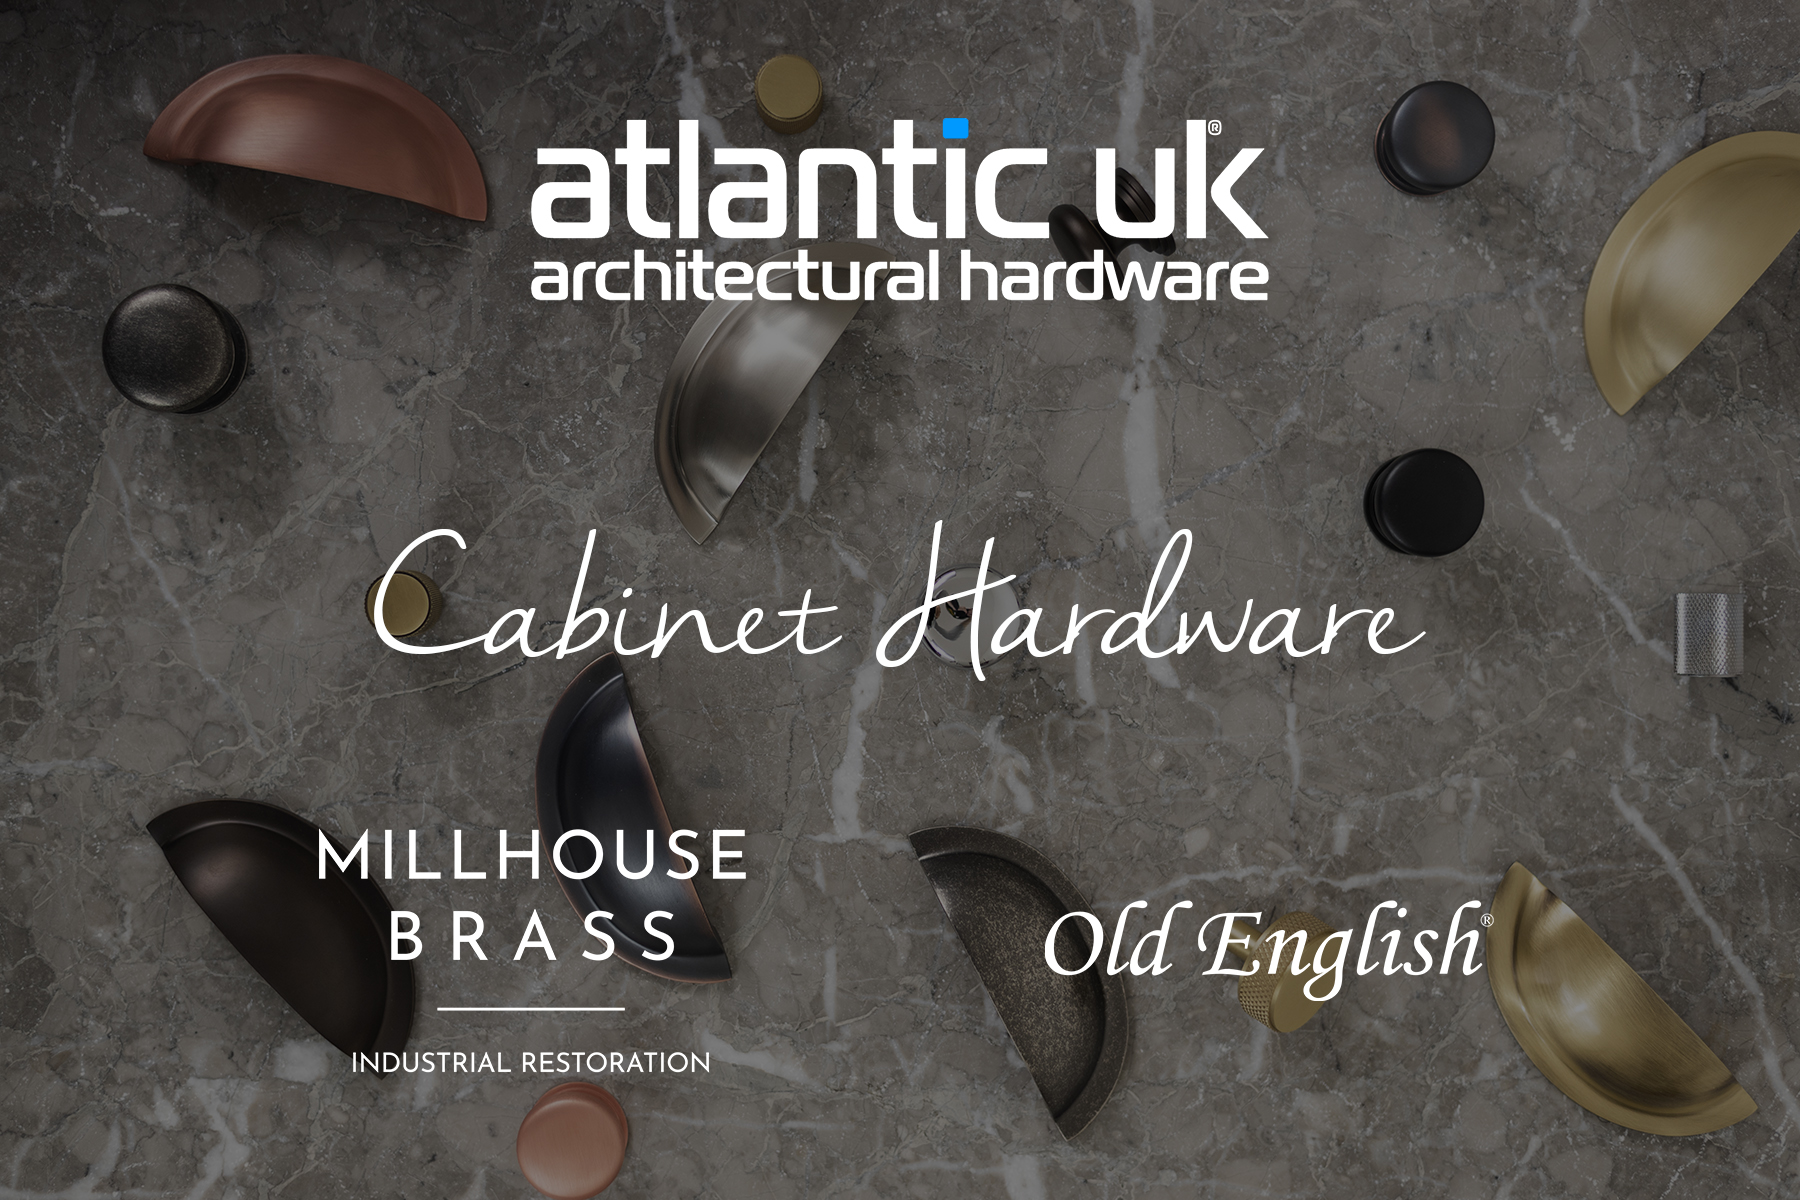 Introducing… Cabinet Hardware